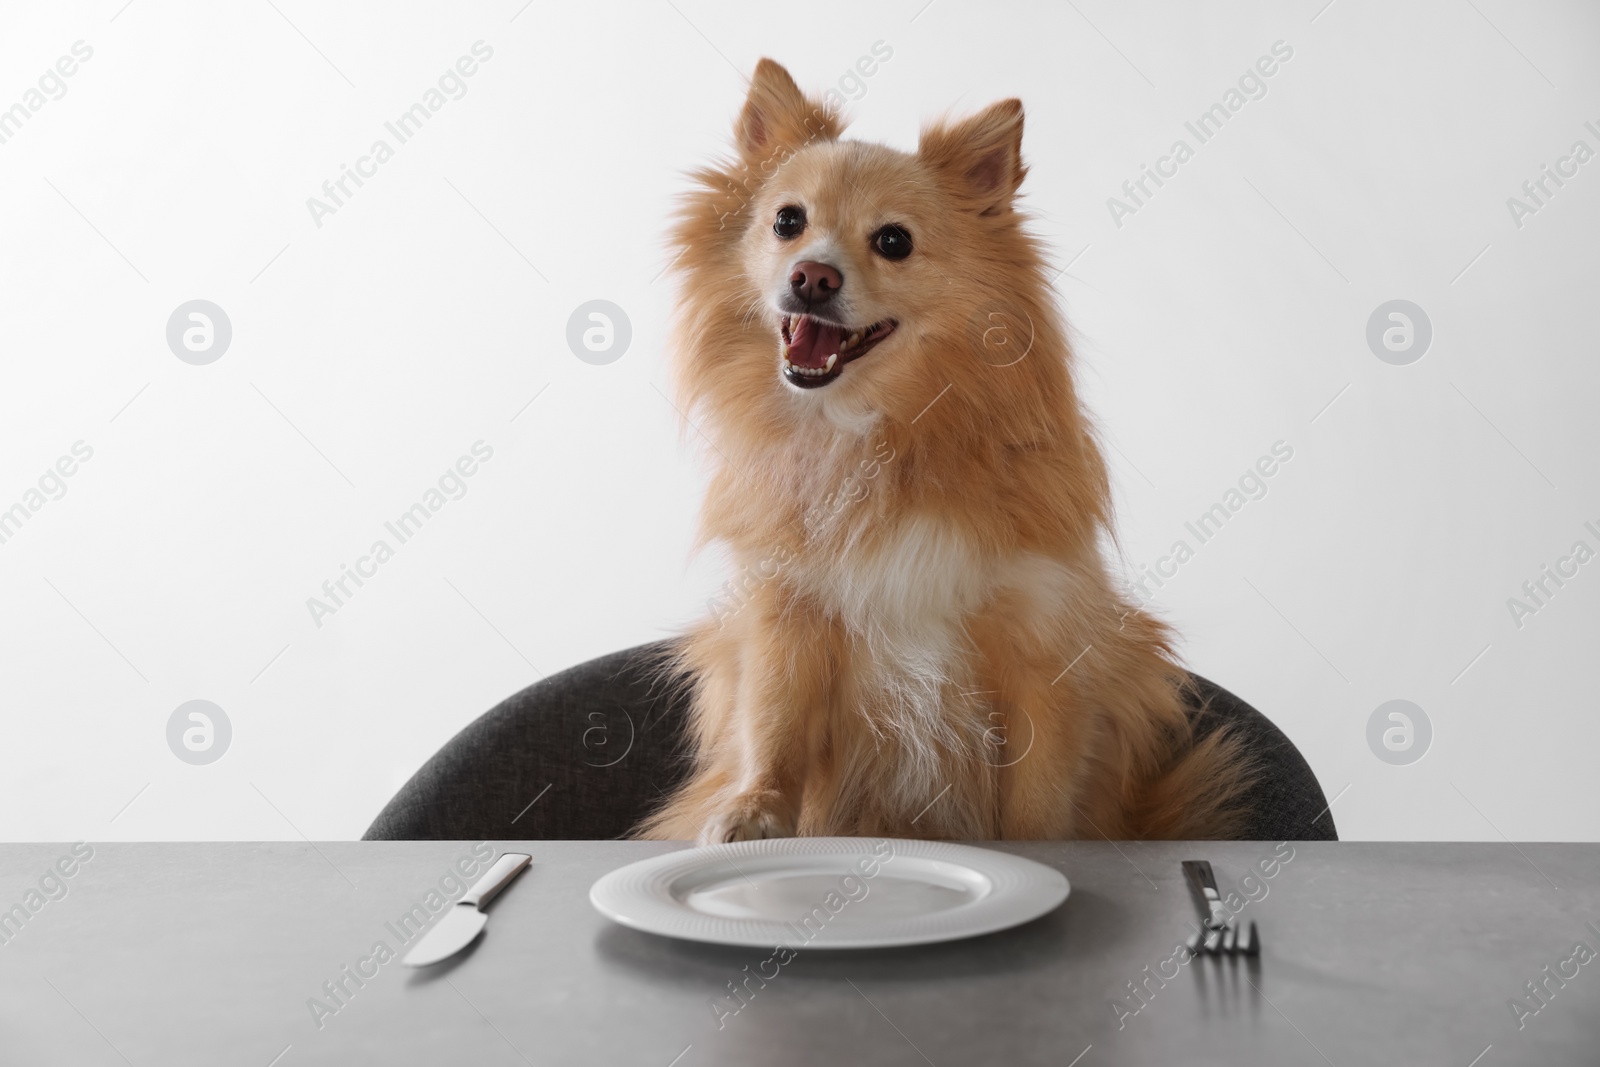 Photo of Hungry Pomeranian spitz dog waiting for food at table with empty plate indoors